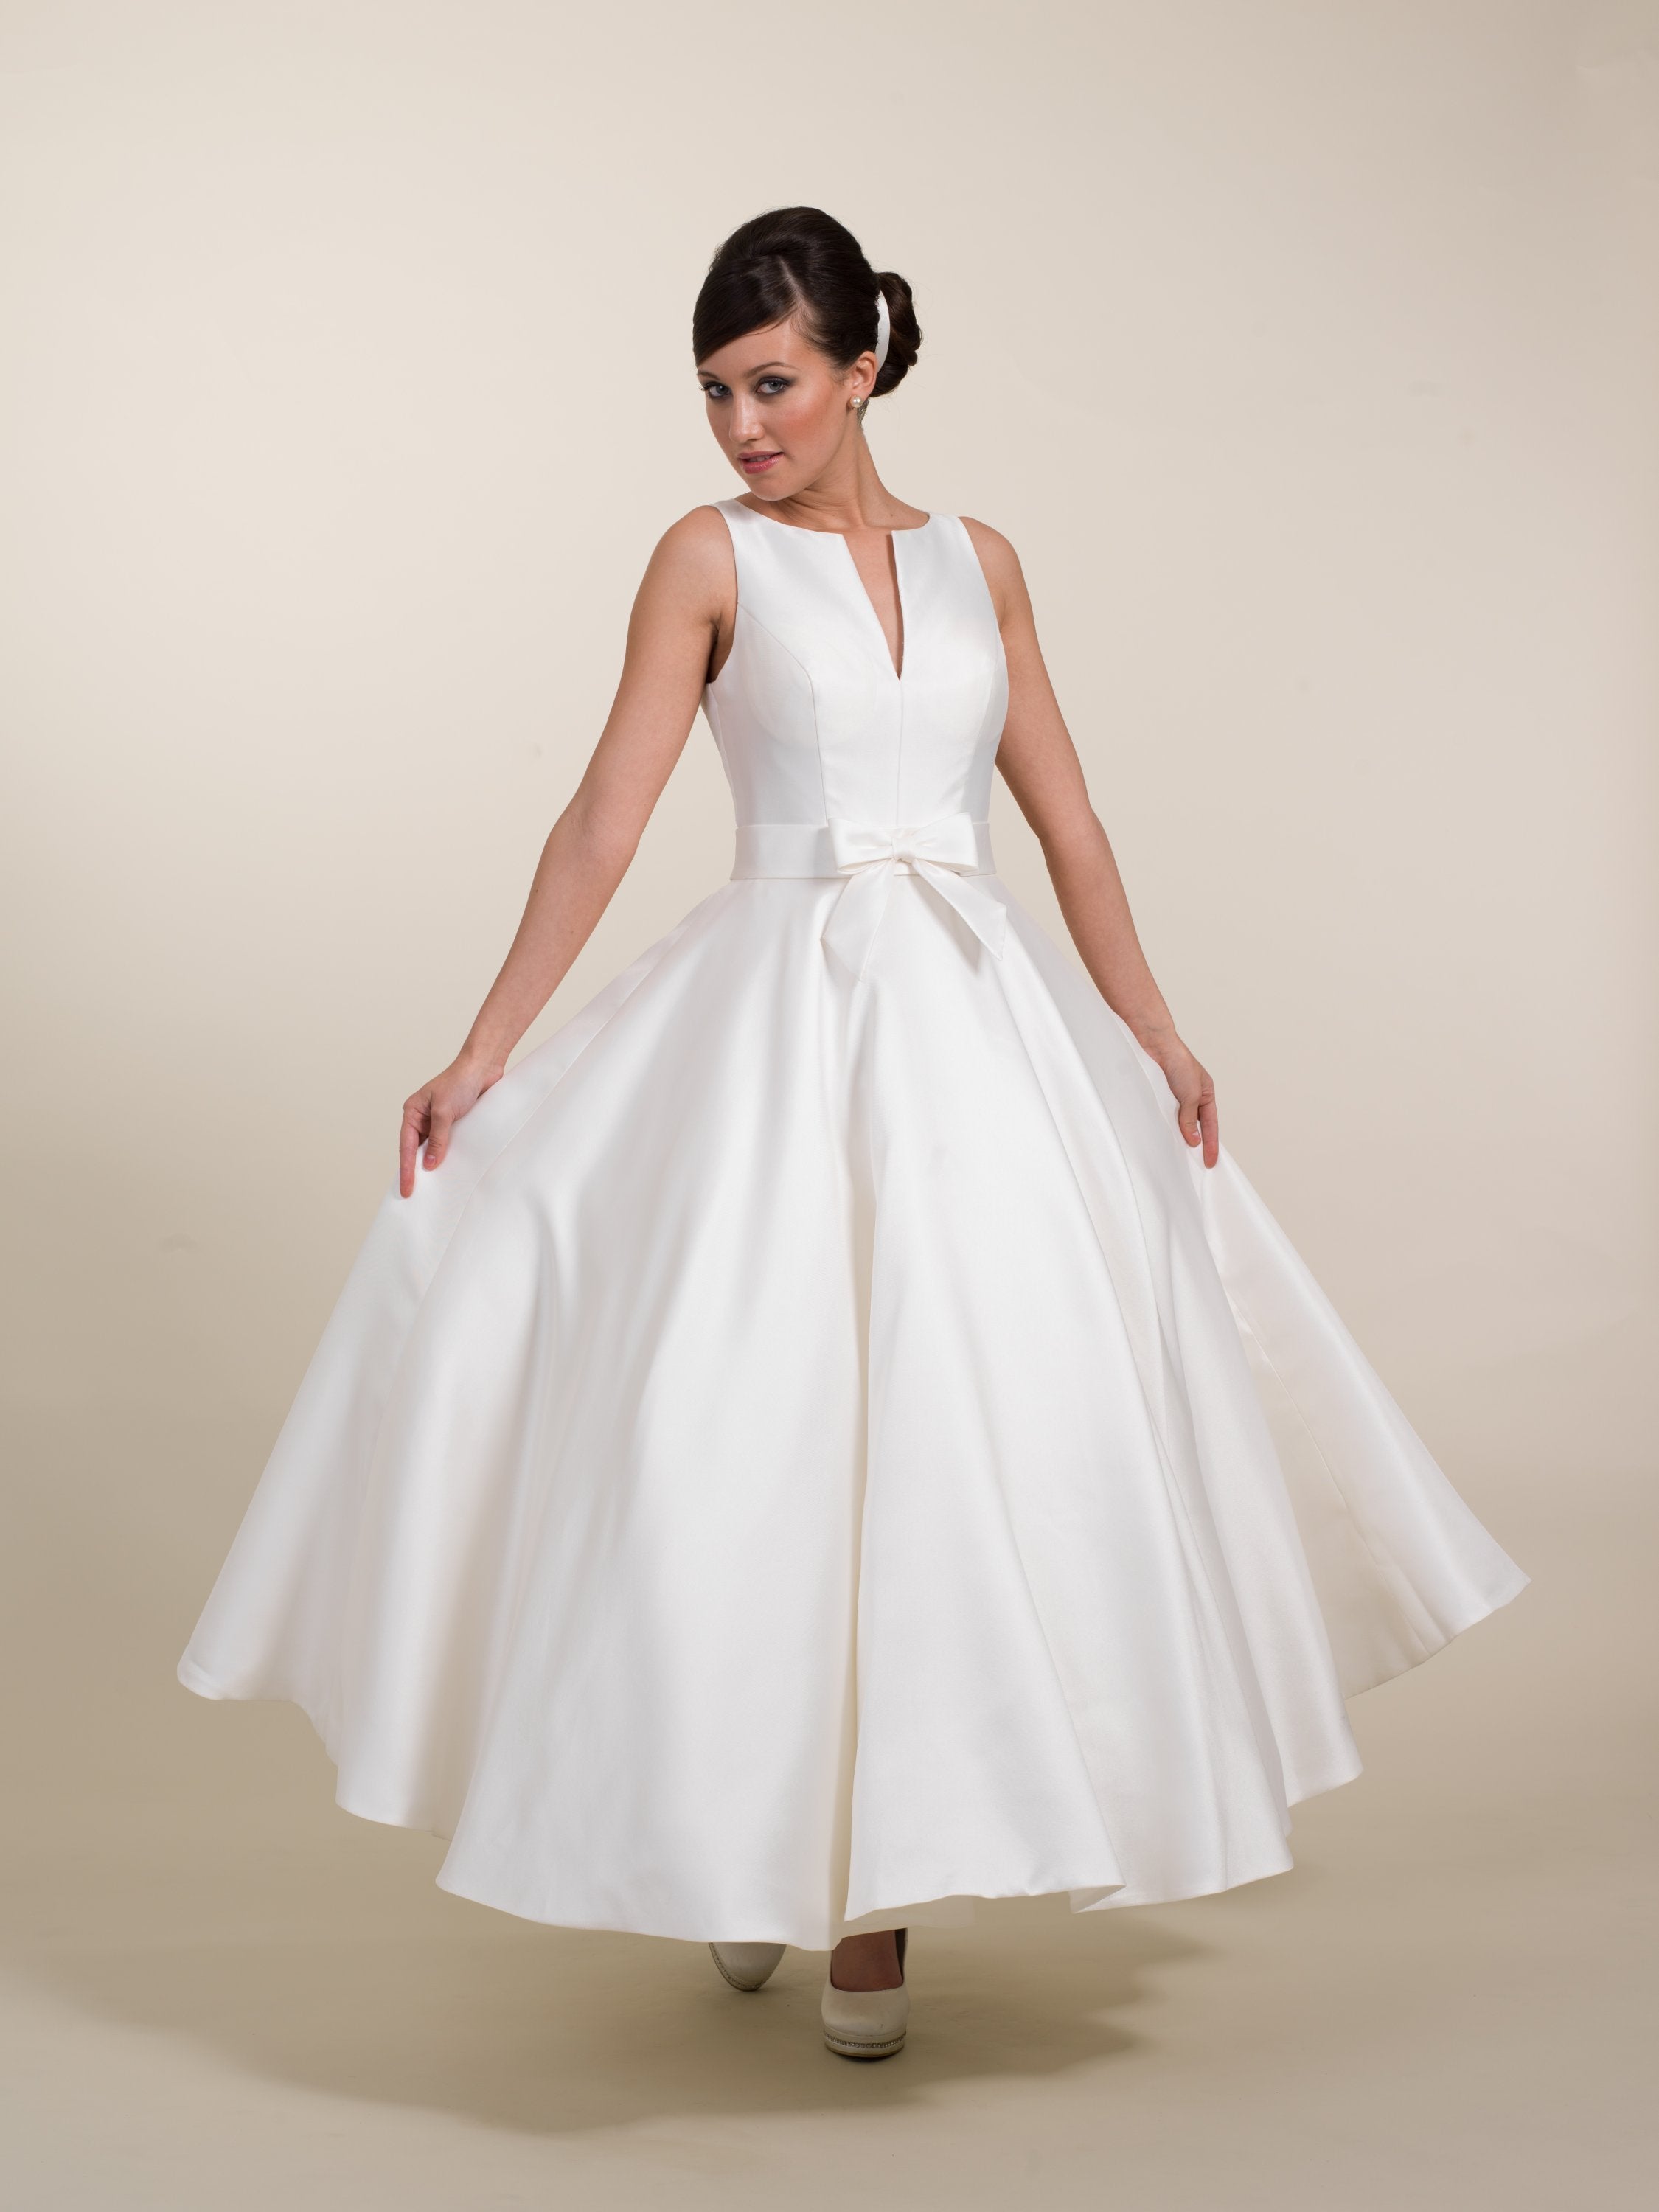 Image of Veronica - a tea length Mikado wedding gown with waist bow and full circle skirt